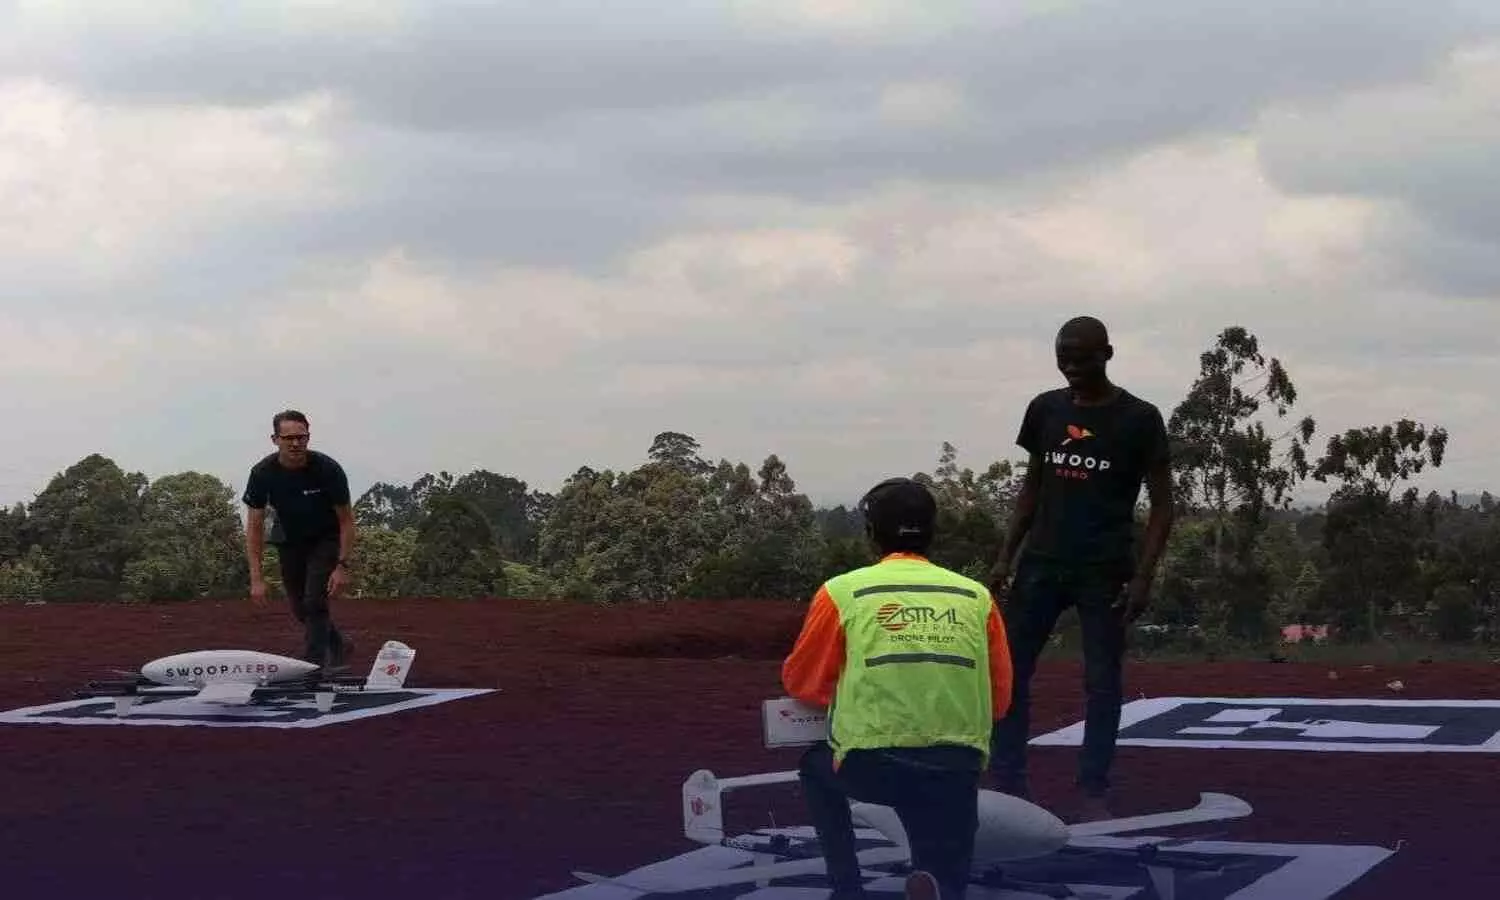 Swoop Aero, Astral Aviation, Skyports collaborate for drone logistics network in Kenya